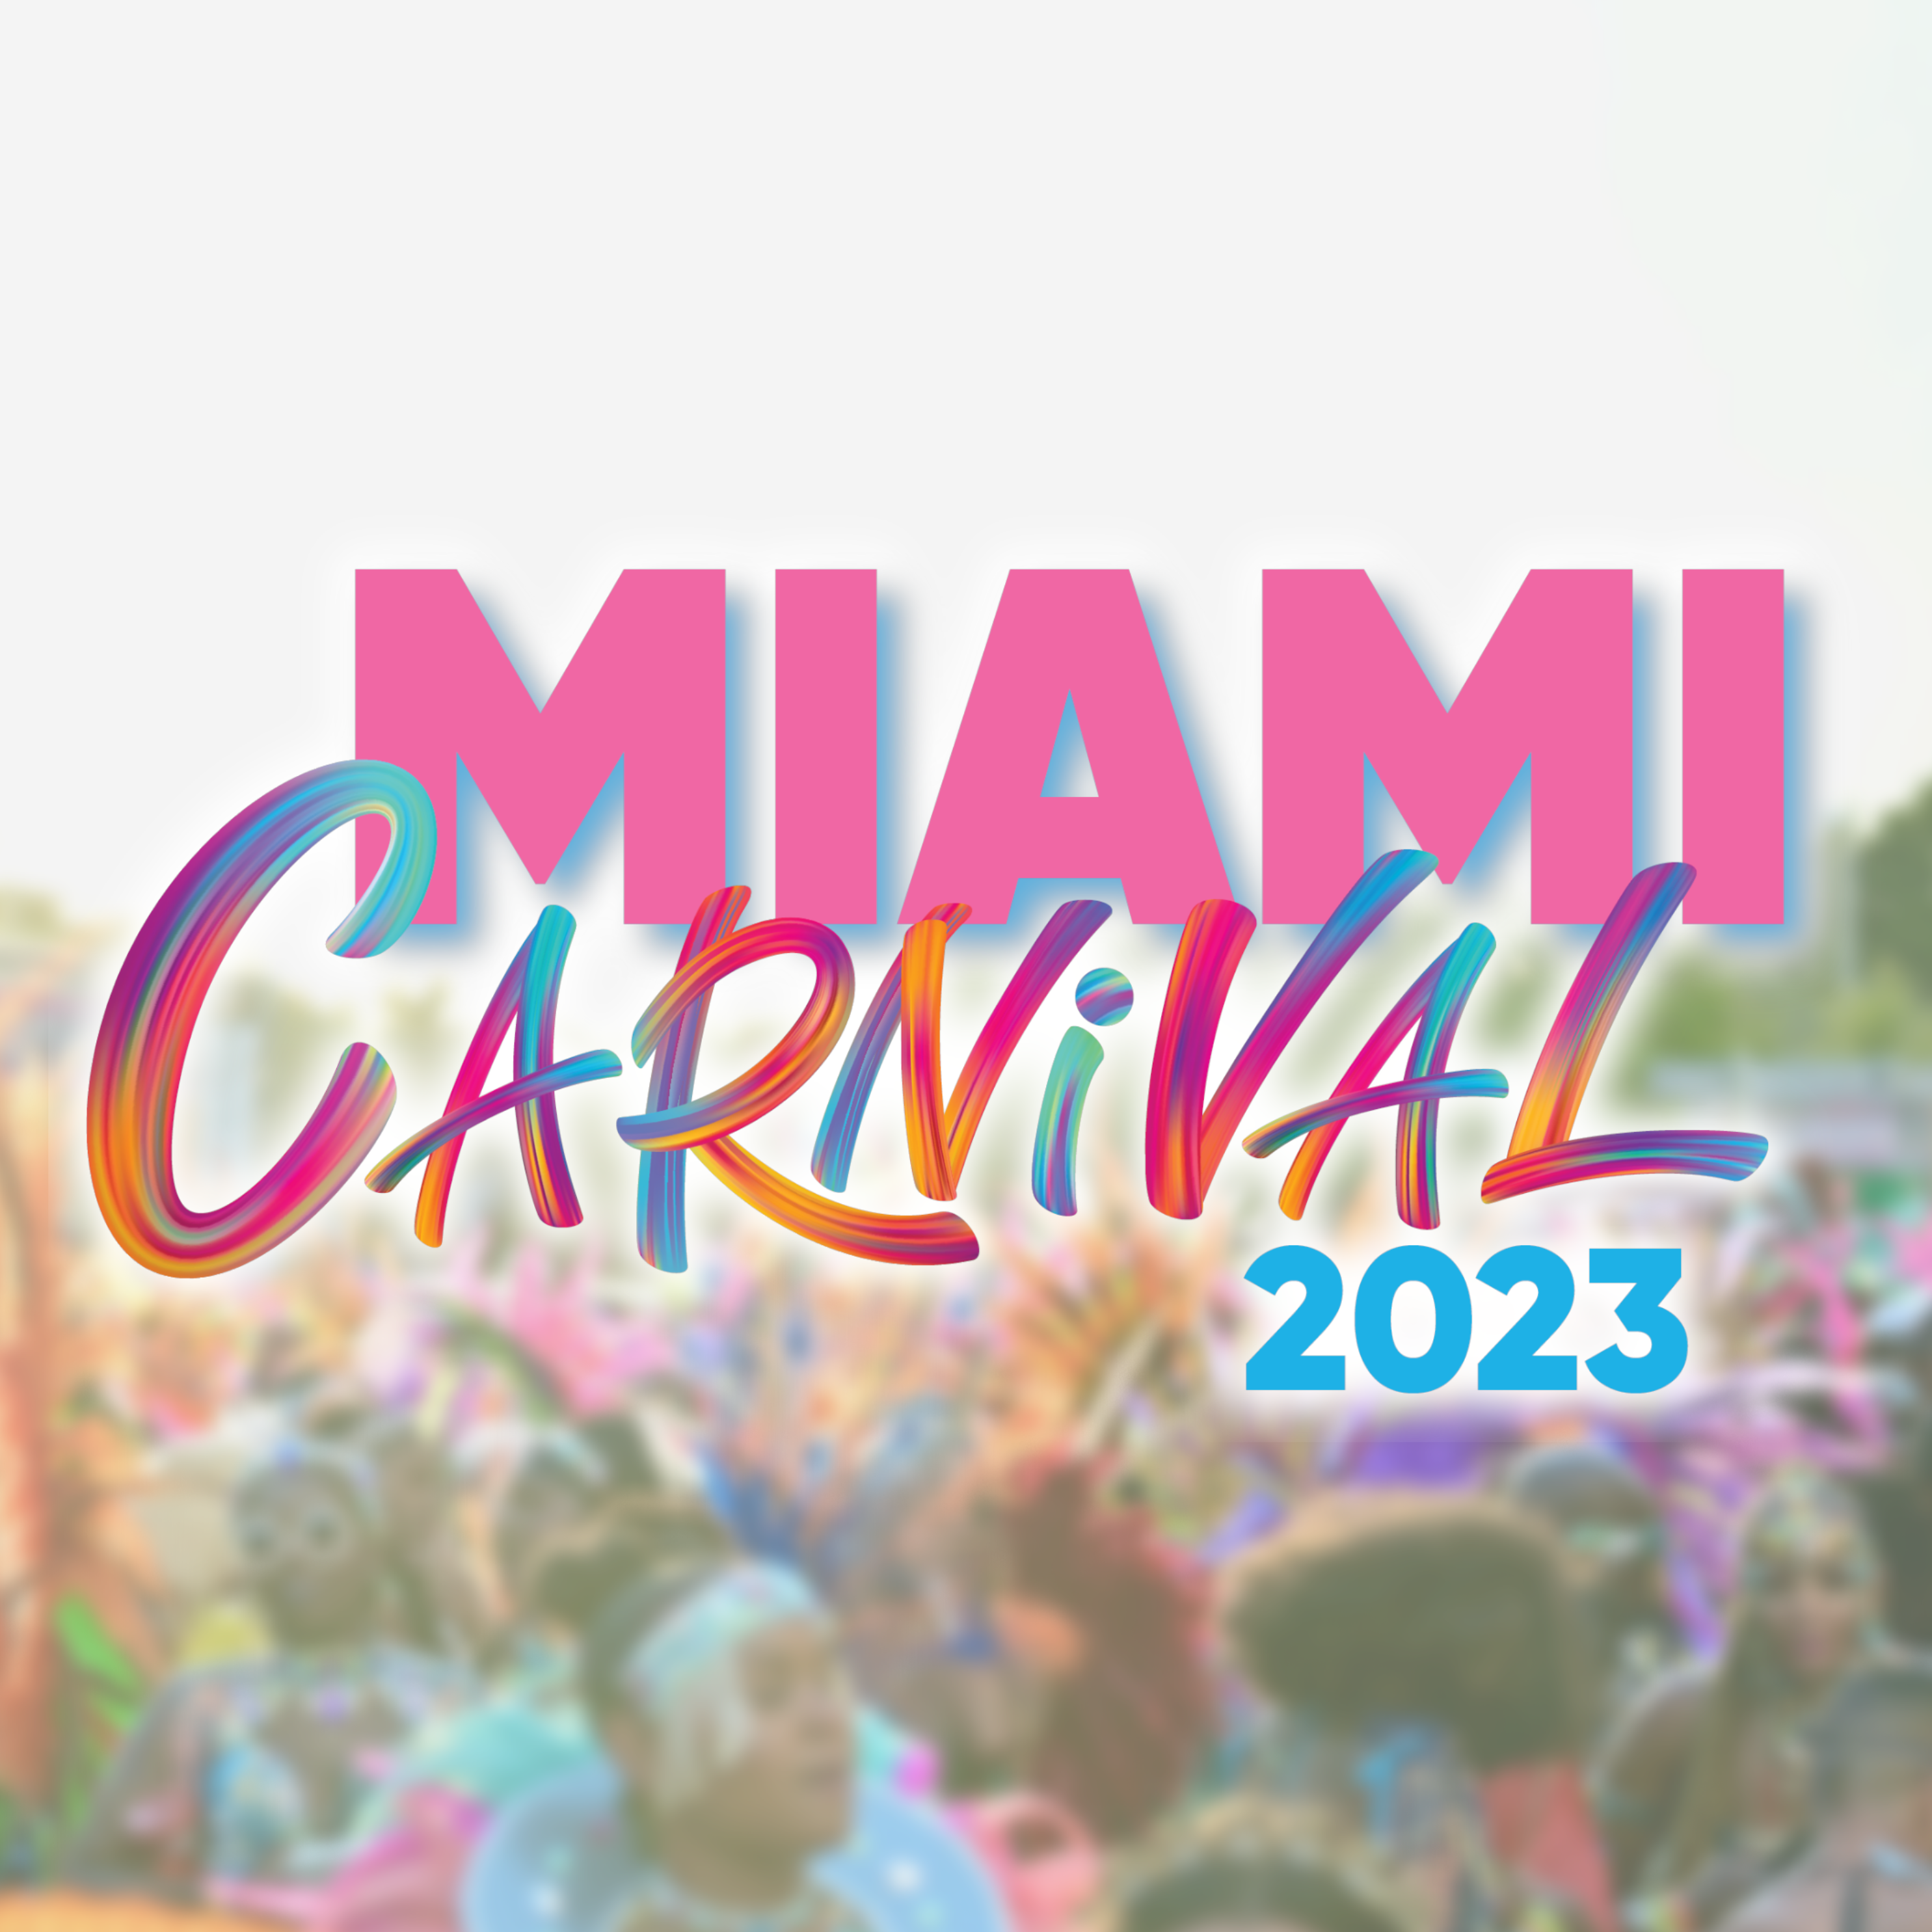 EVENTS - Welcome to Miami Carnival